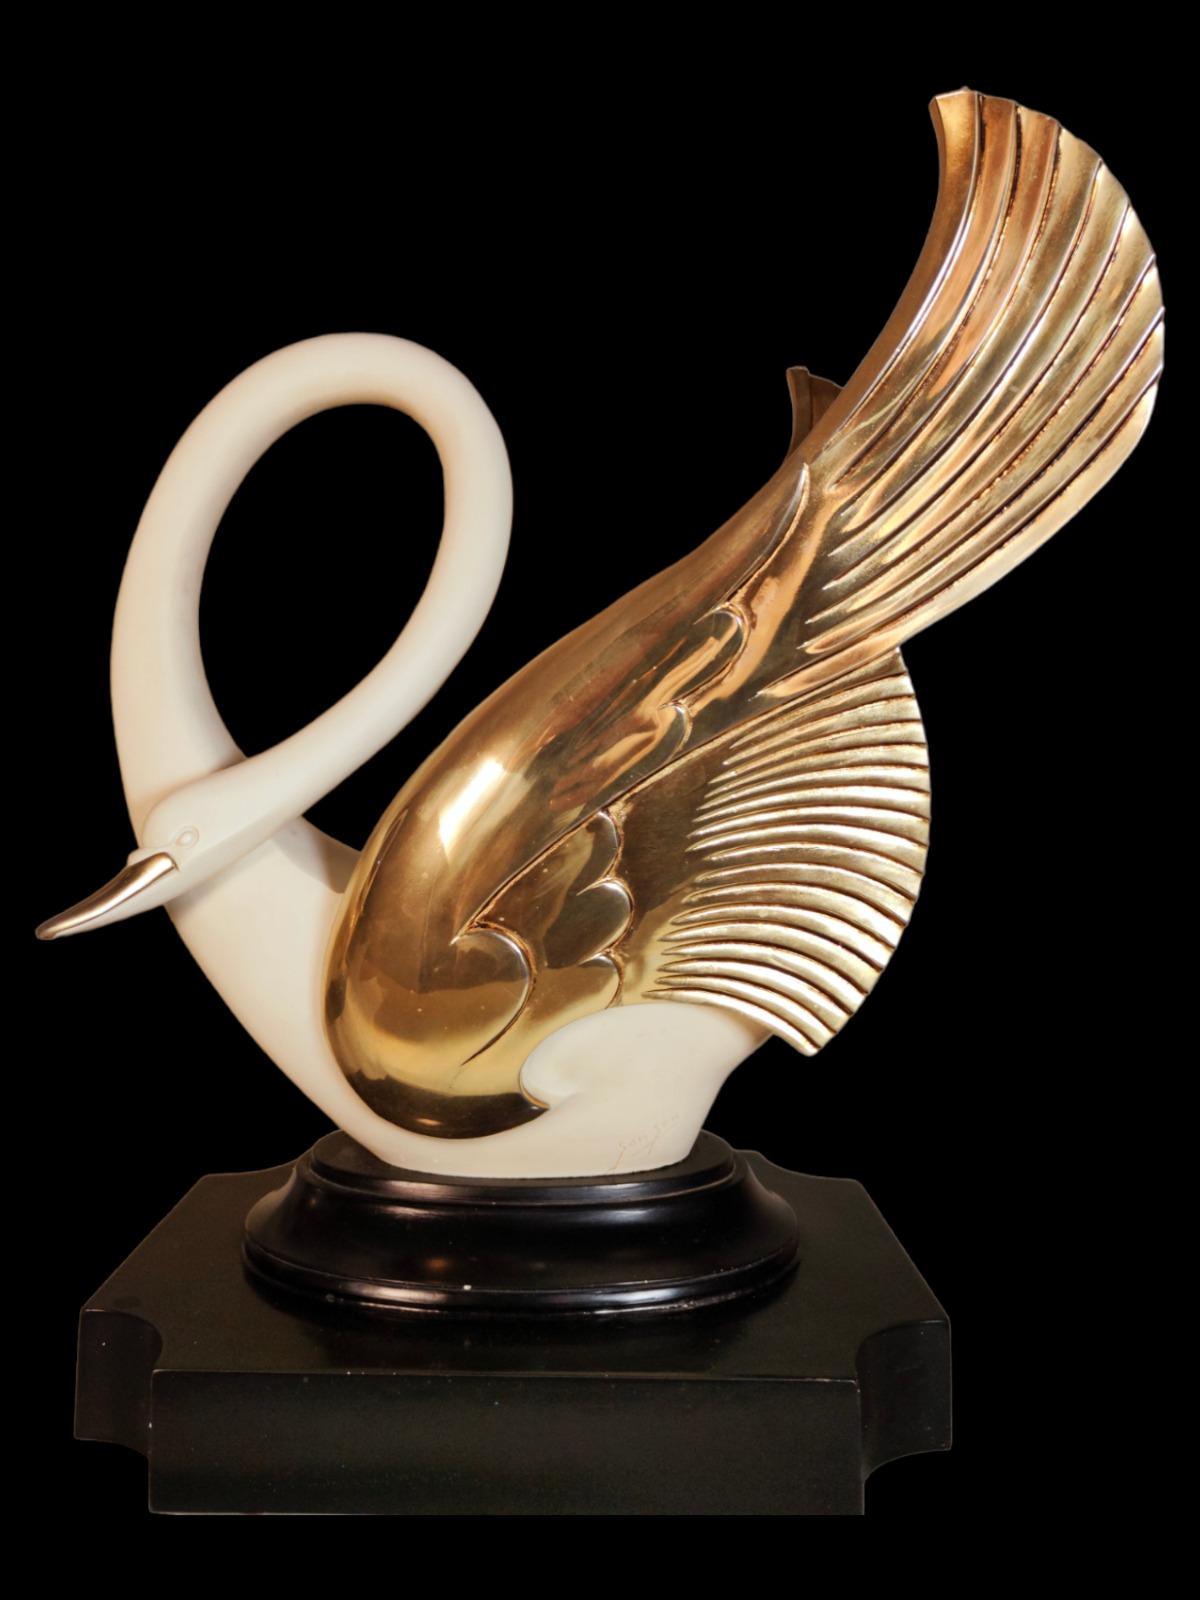 Pair of Maison Jansen swans elegant pair of Artdeco style swans by Maison Janse. Signed. They are made of resin and golden bronze. In perfect condition. Available 4. Measures: 51 x 40 x 31 cmpair of cactus years 70
Pair of cactus in glazed